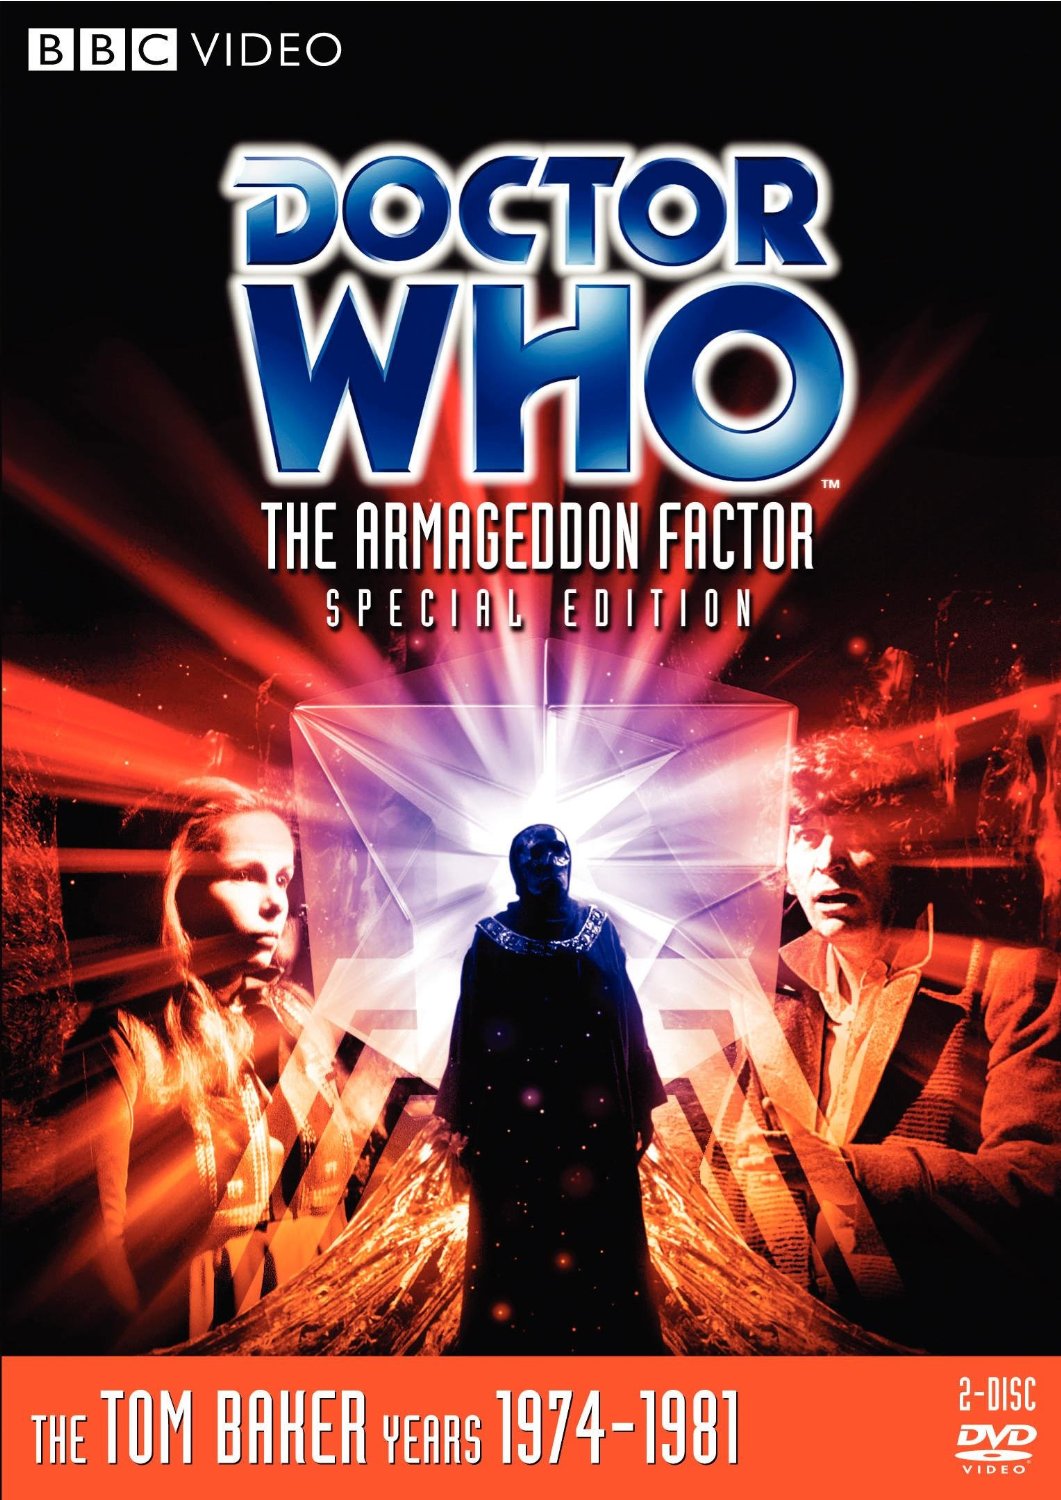 DVD Region 1 US Special Edition cover